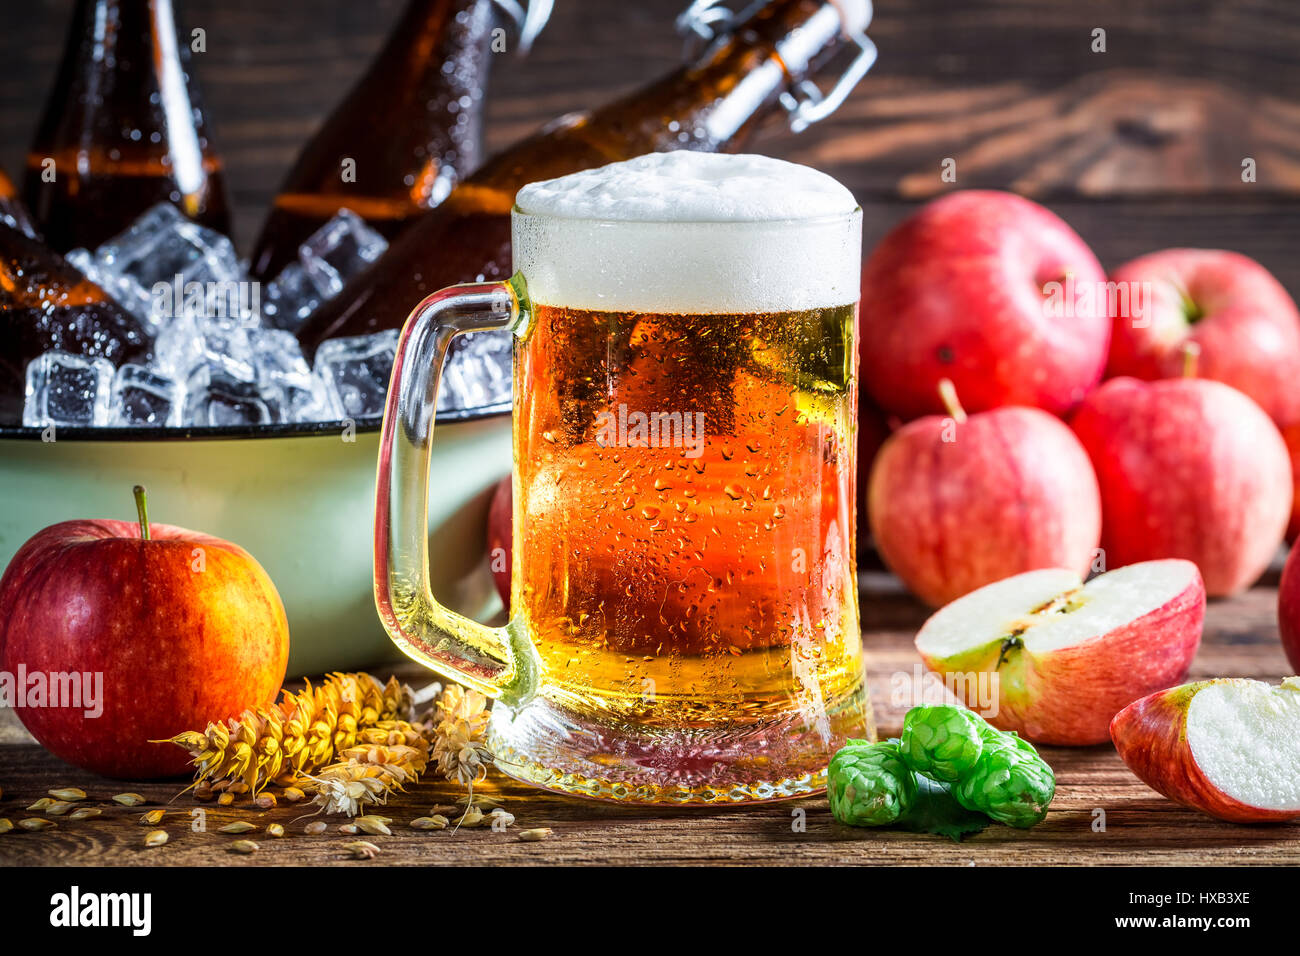 Cold and fresh cider beer with apples Stock Photo